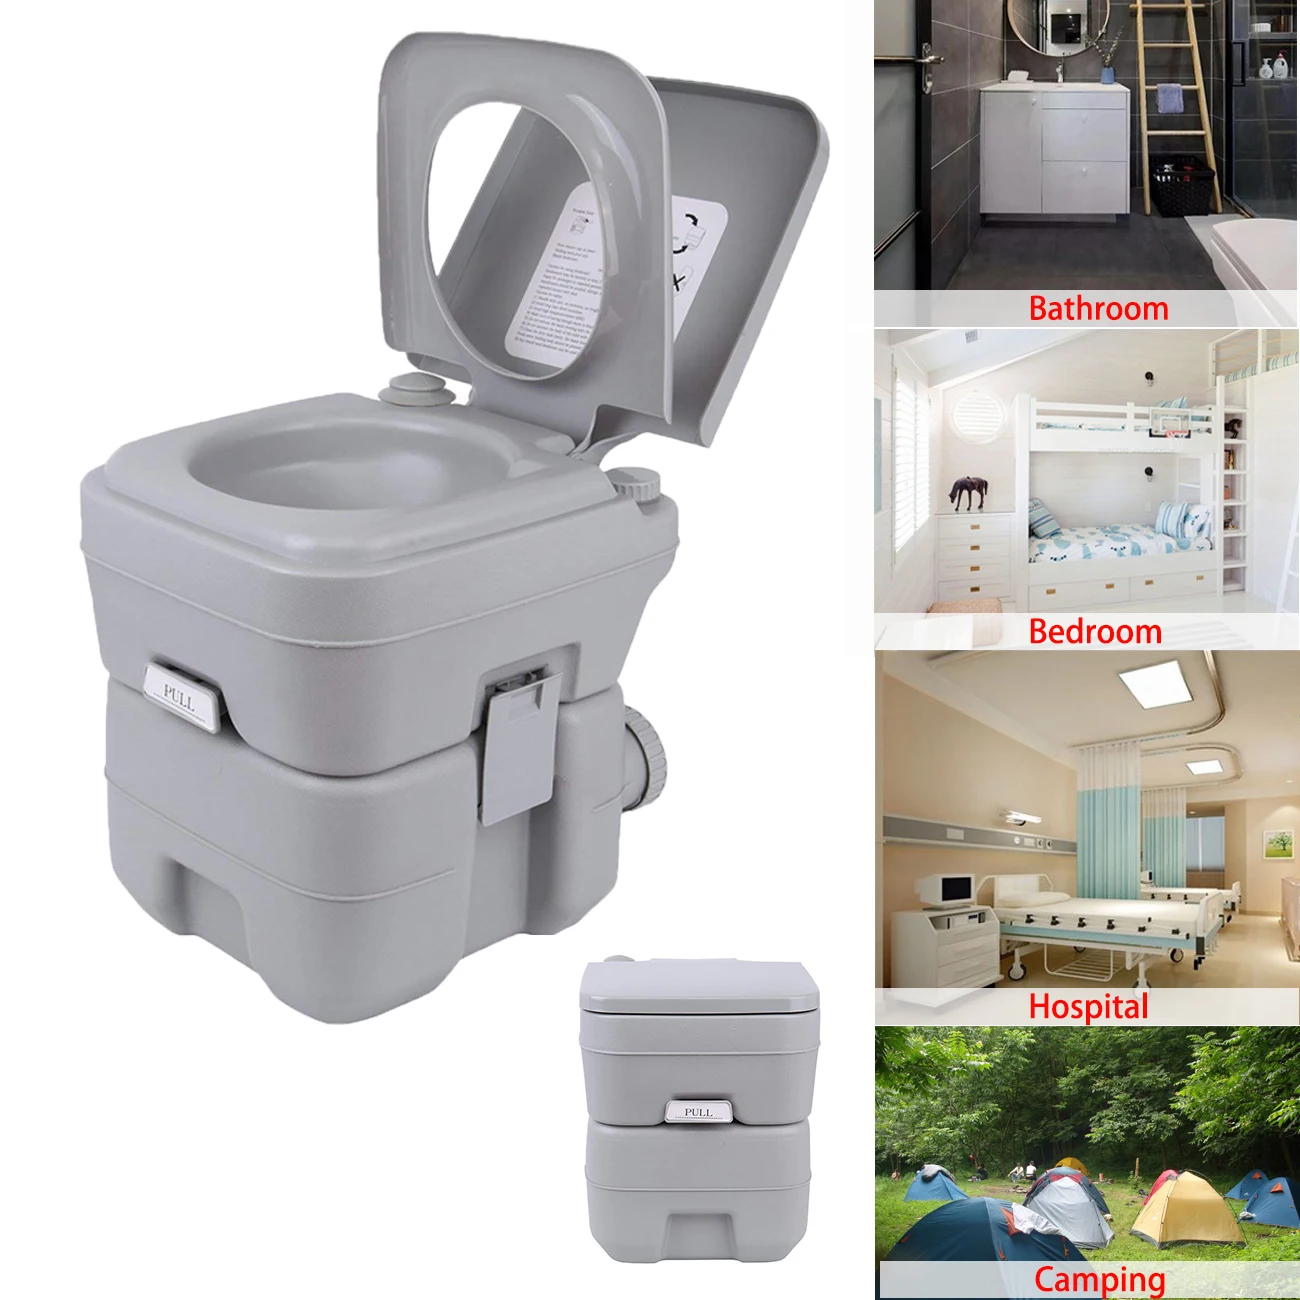 

Honhill Portable Toilet Outdoor Camping Load 130kg Adult Children Mobile Toilet Camping Toilet For Home Hospital Travel Boat 20L